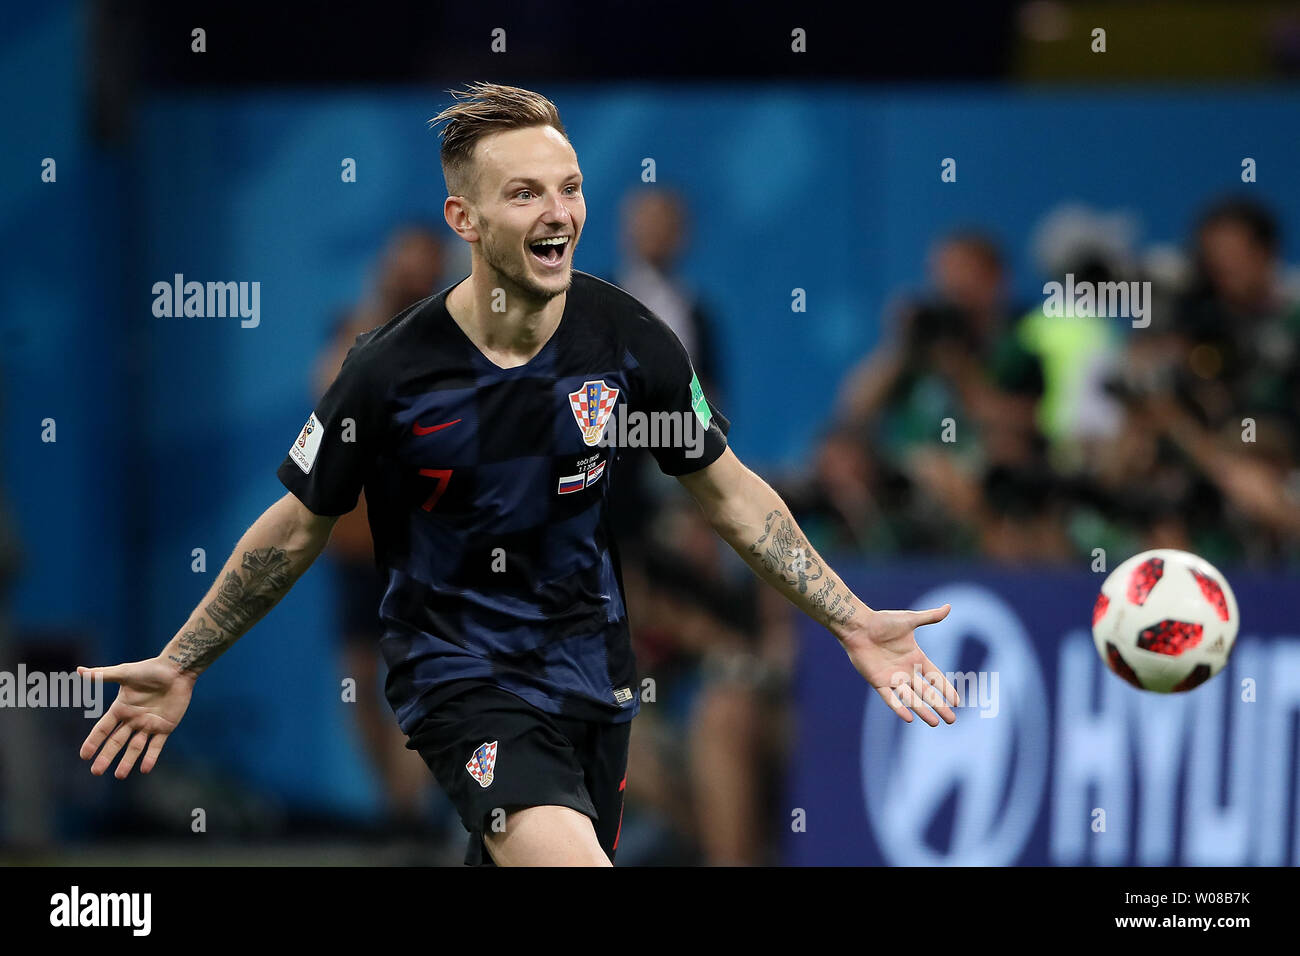 Ivan Rakitic of Croatia celebrates scoring the winning kick in the penalty shoot-out following the 2018 FIFA World Cup quarter-final match at Fisht Stadium in Sochi, Russia on July 7, 2018. Croatia beat Russia 4-3 on penalties to advance to the semi-finals. Photo by Chris Brunskill/UPI Stock Photo